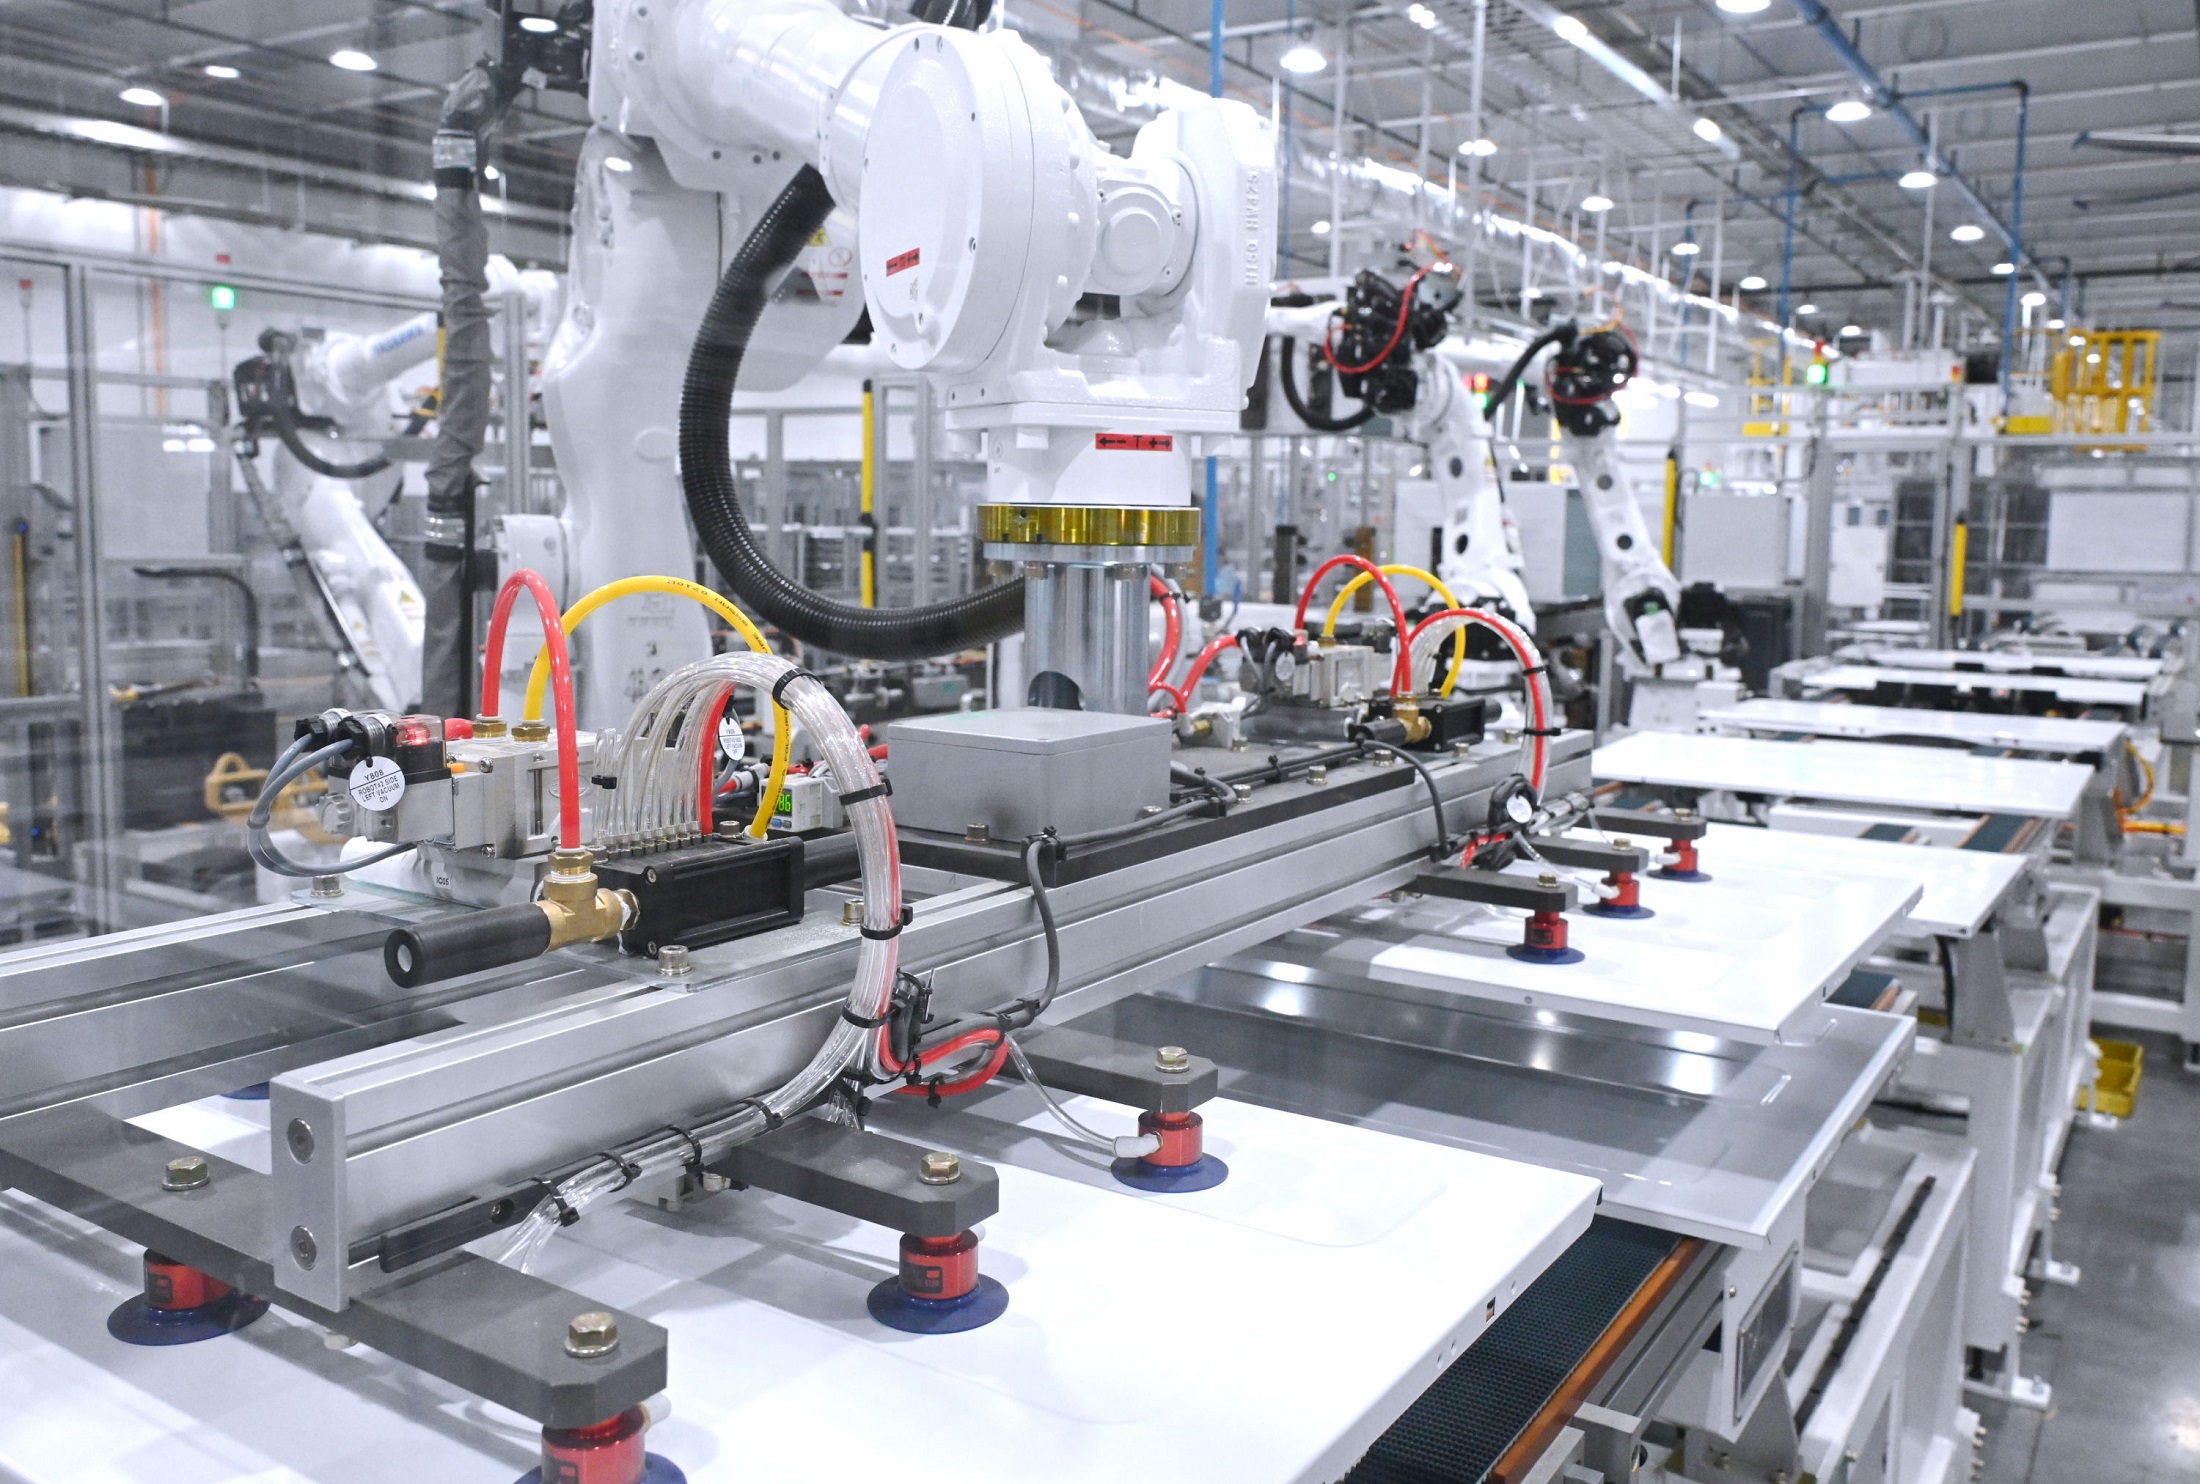 In the LG Tennessee factory, the robots are lifting heavy parts